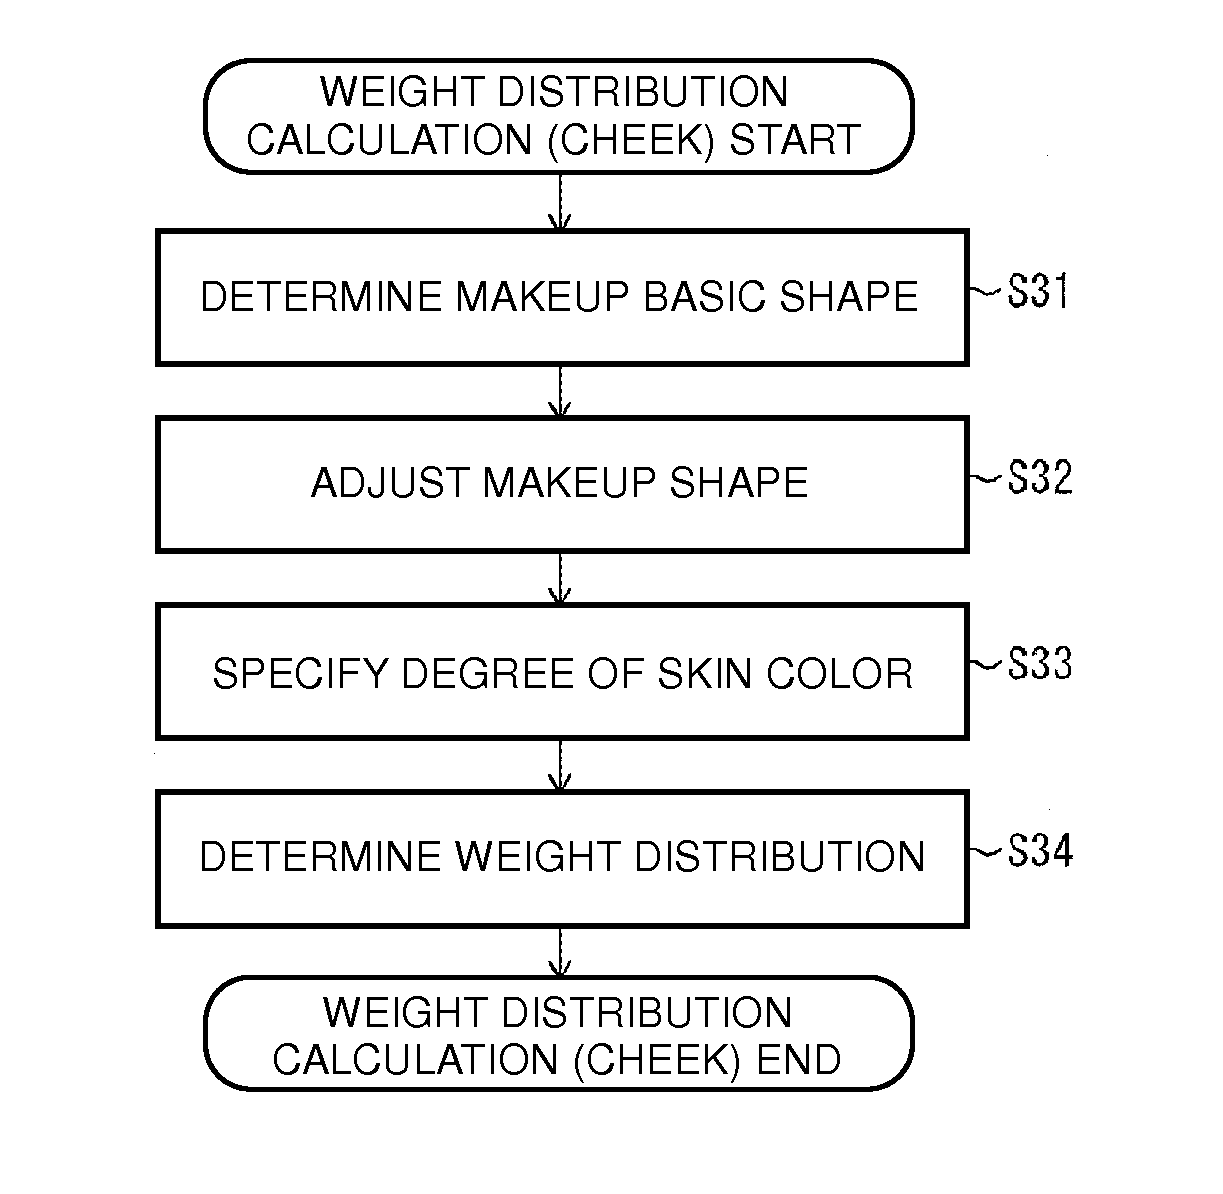 Image-processing device, image-processing method, and control program